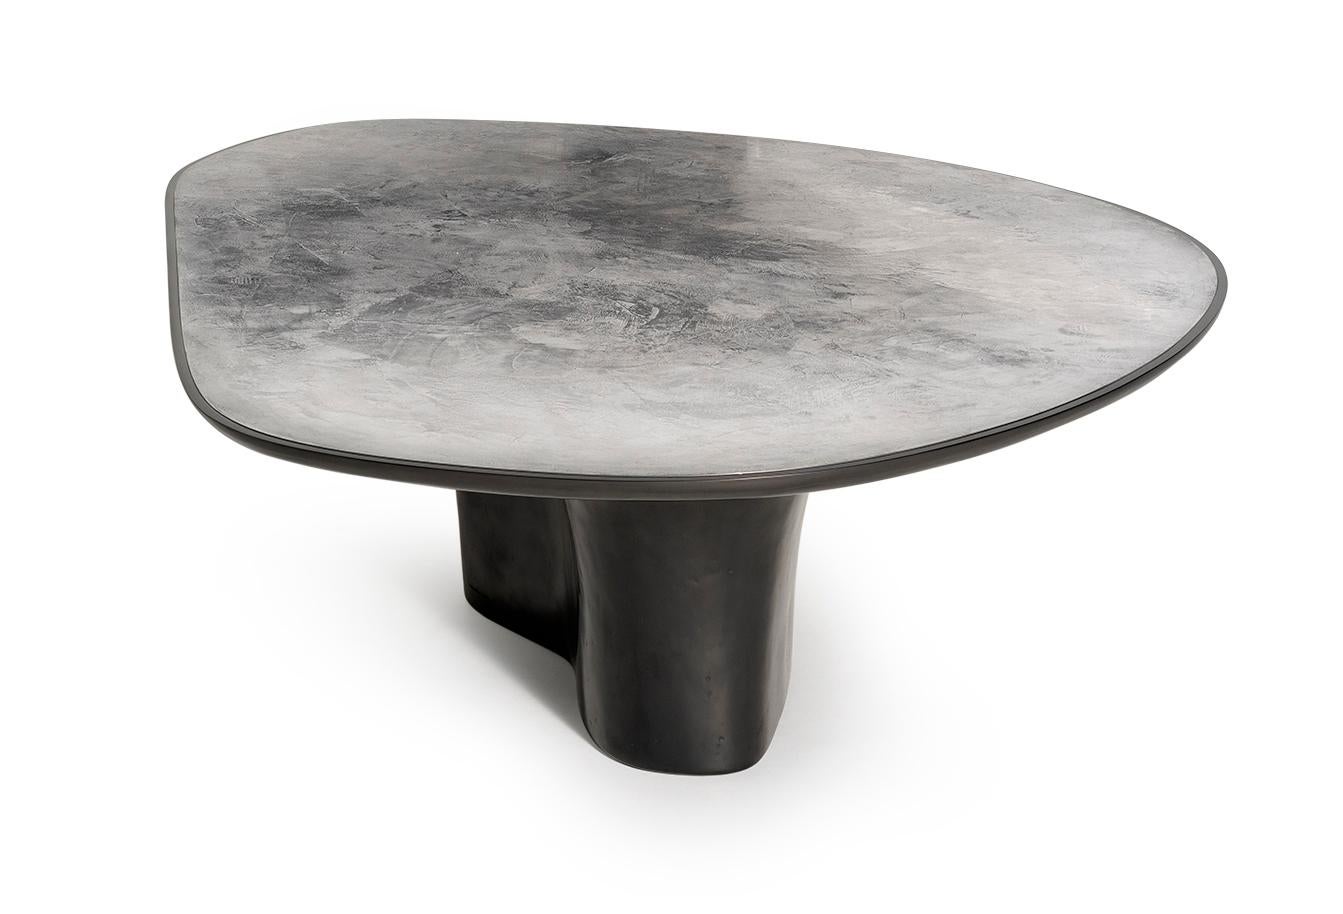 NR - 21st century European black circular modern custom made contemporary dining table 

As a larger counterpart of an NR low table, NR dining table is staggering even more with its converse feeling of statics. Its soft and intuitively designed